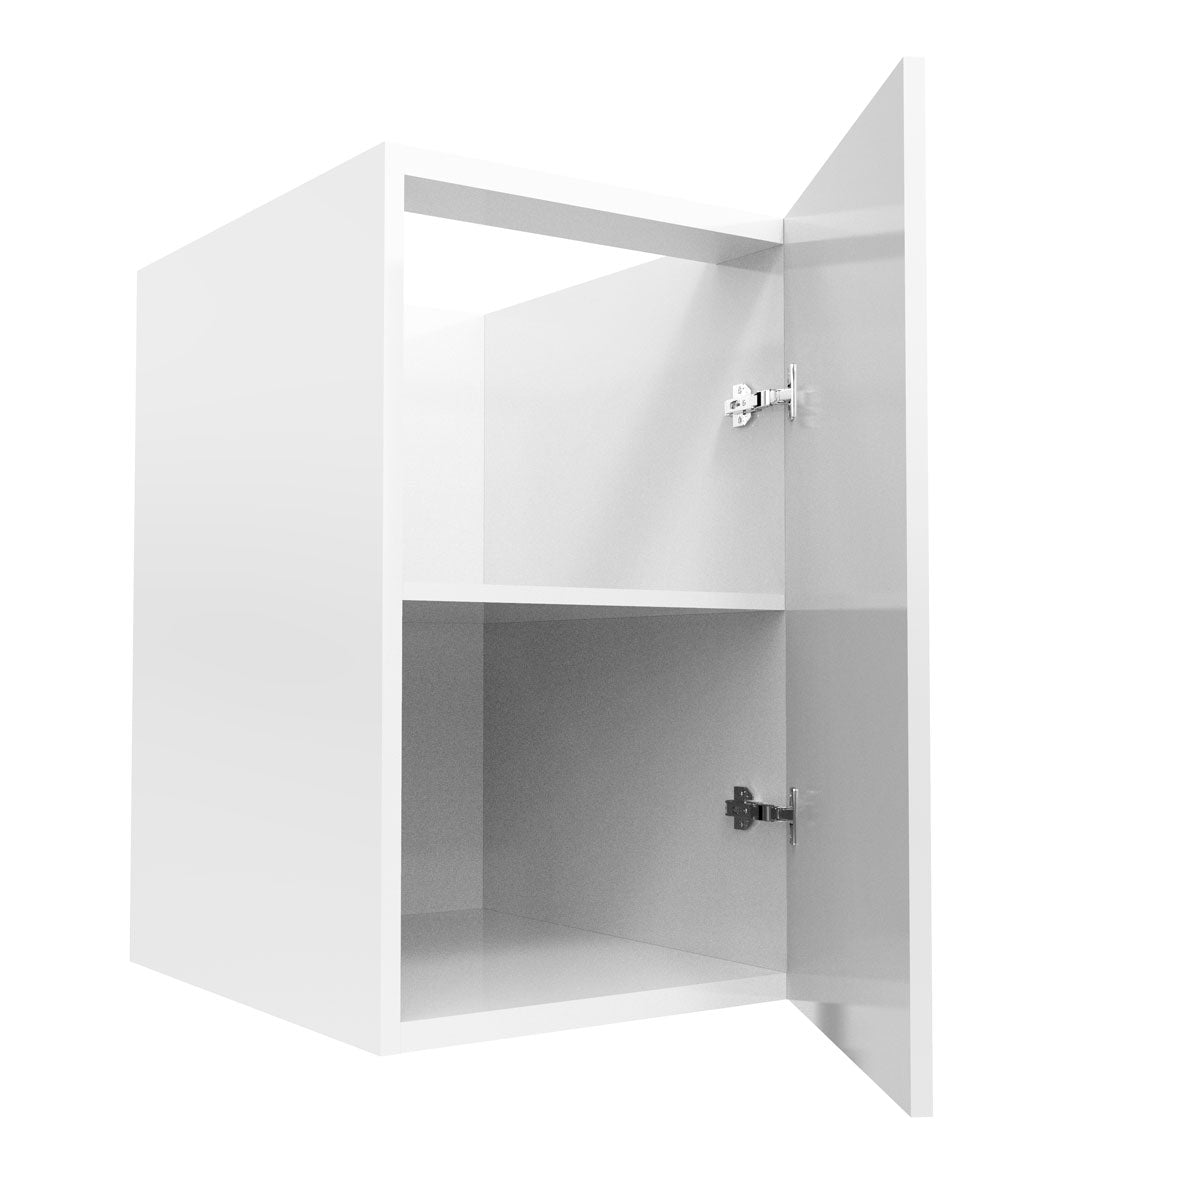 RTA - Glossy White - Full Height Single Door Base Cabinets | 24"W x 34.5"H x 24"D